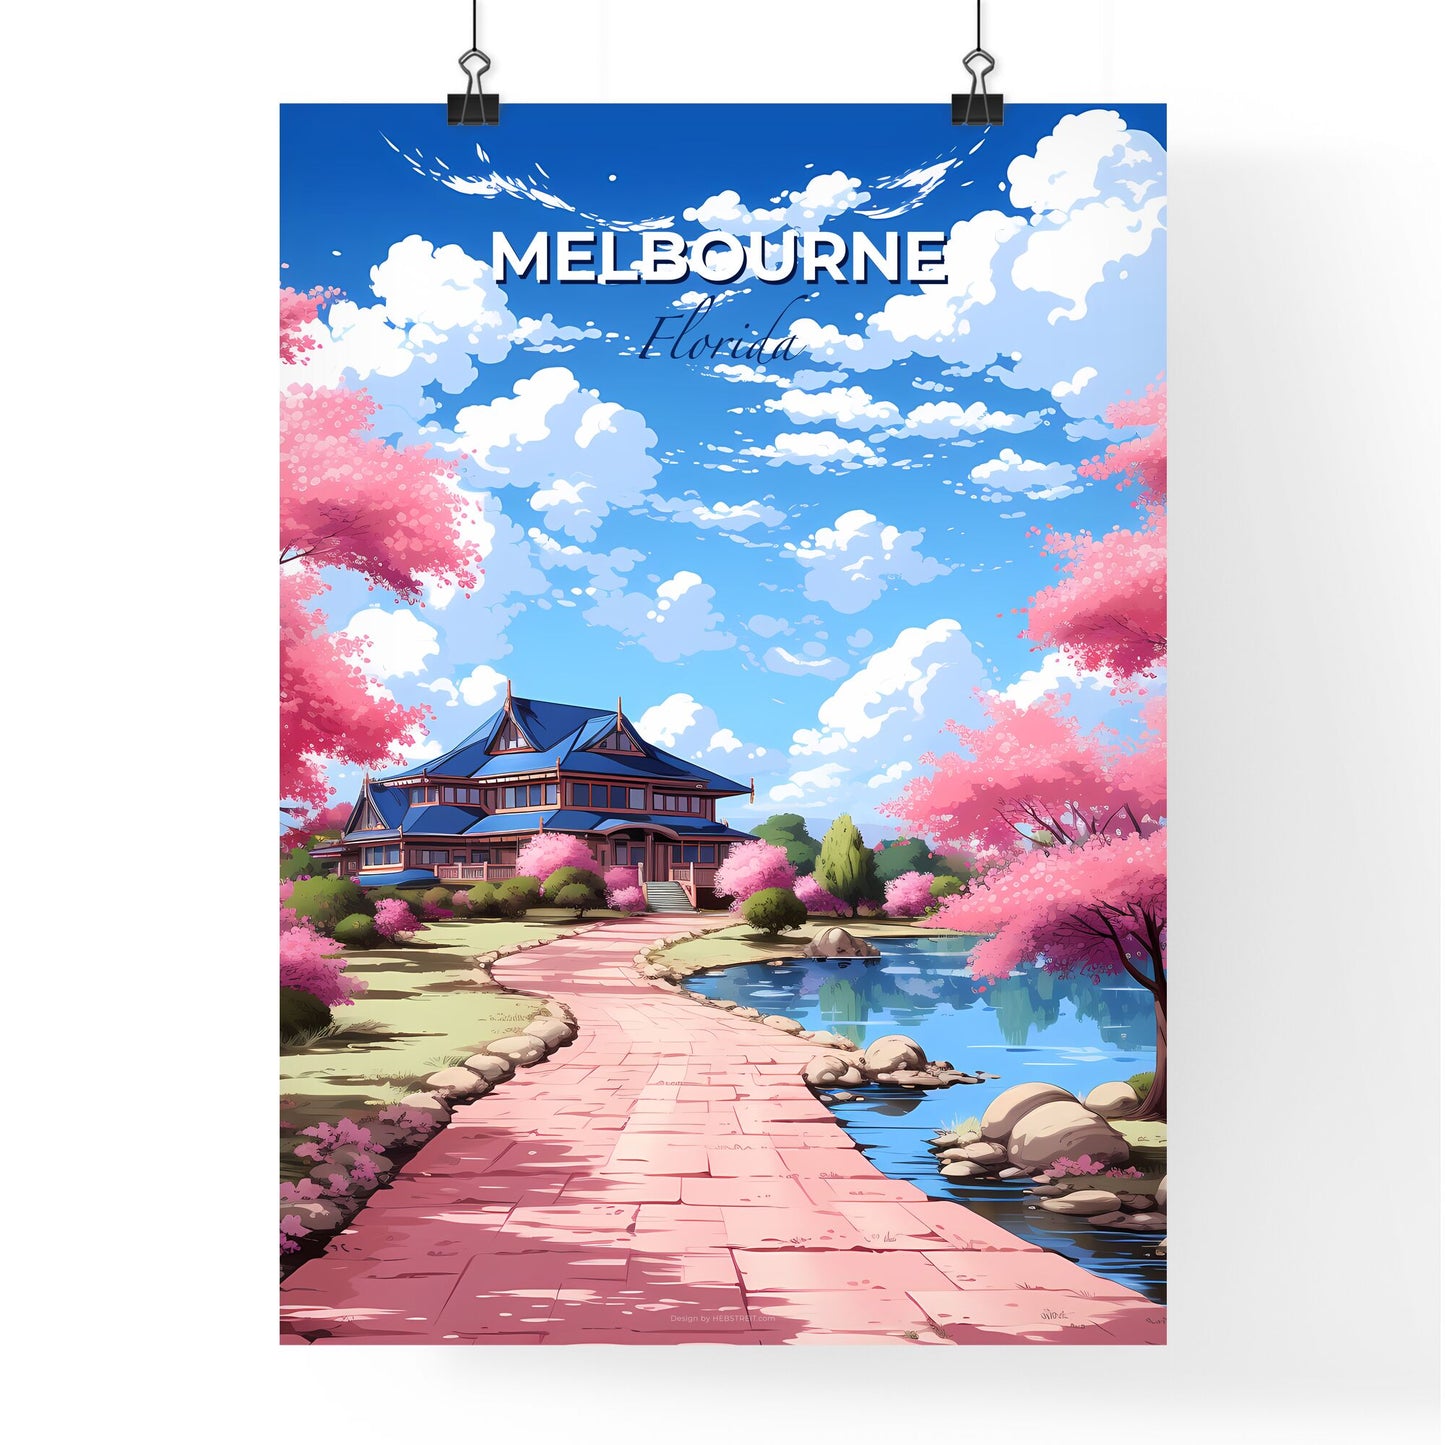 Melbourne, Florida, A Poster of a house with pink trees and a pond Default Title